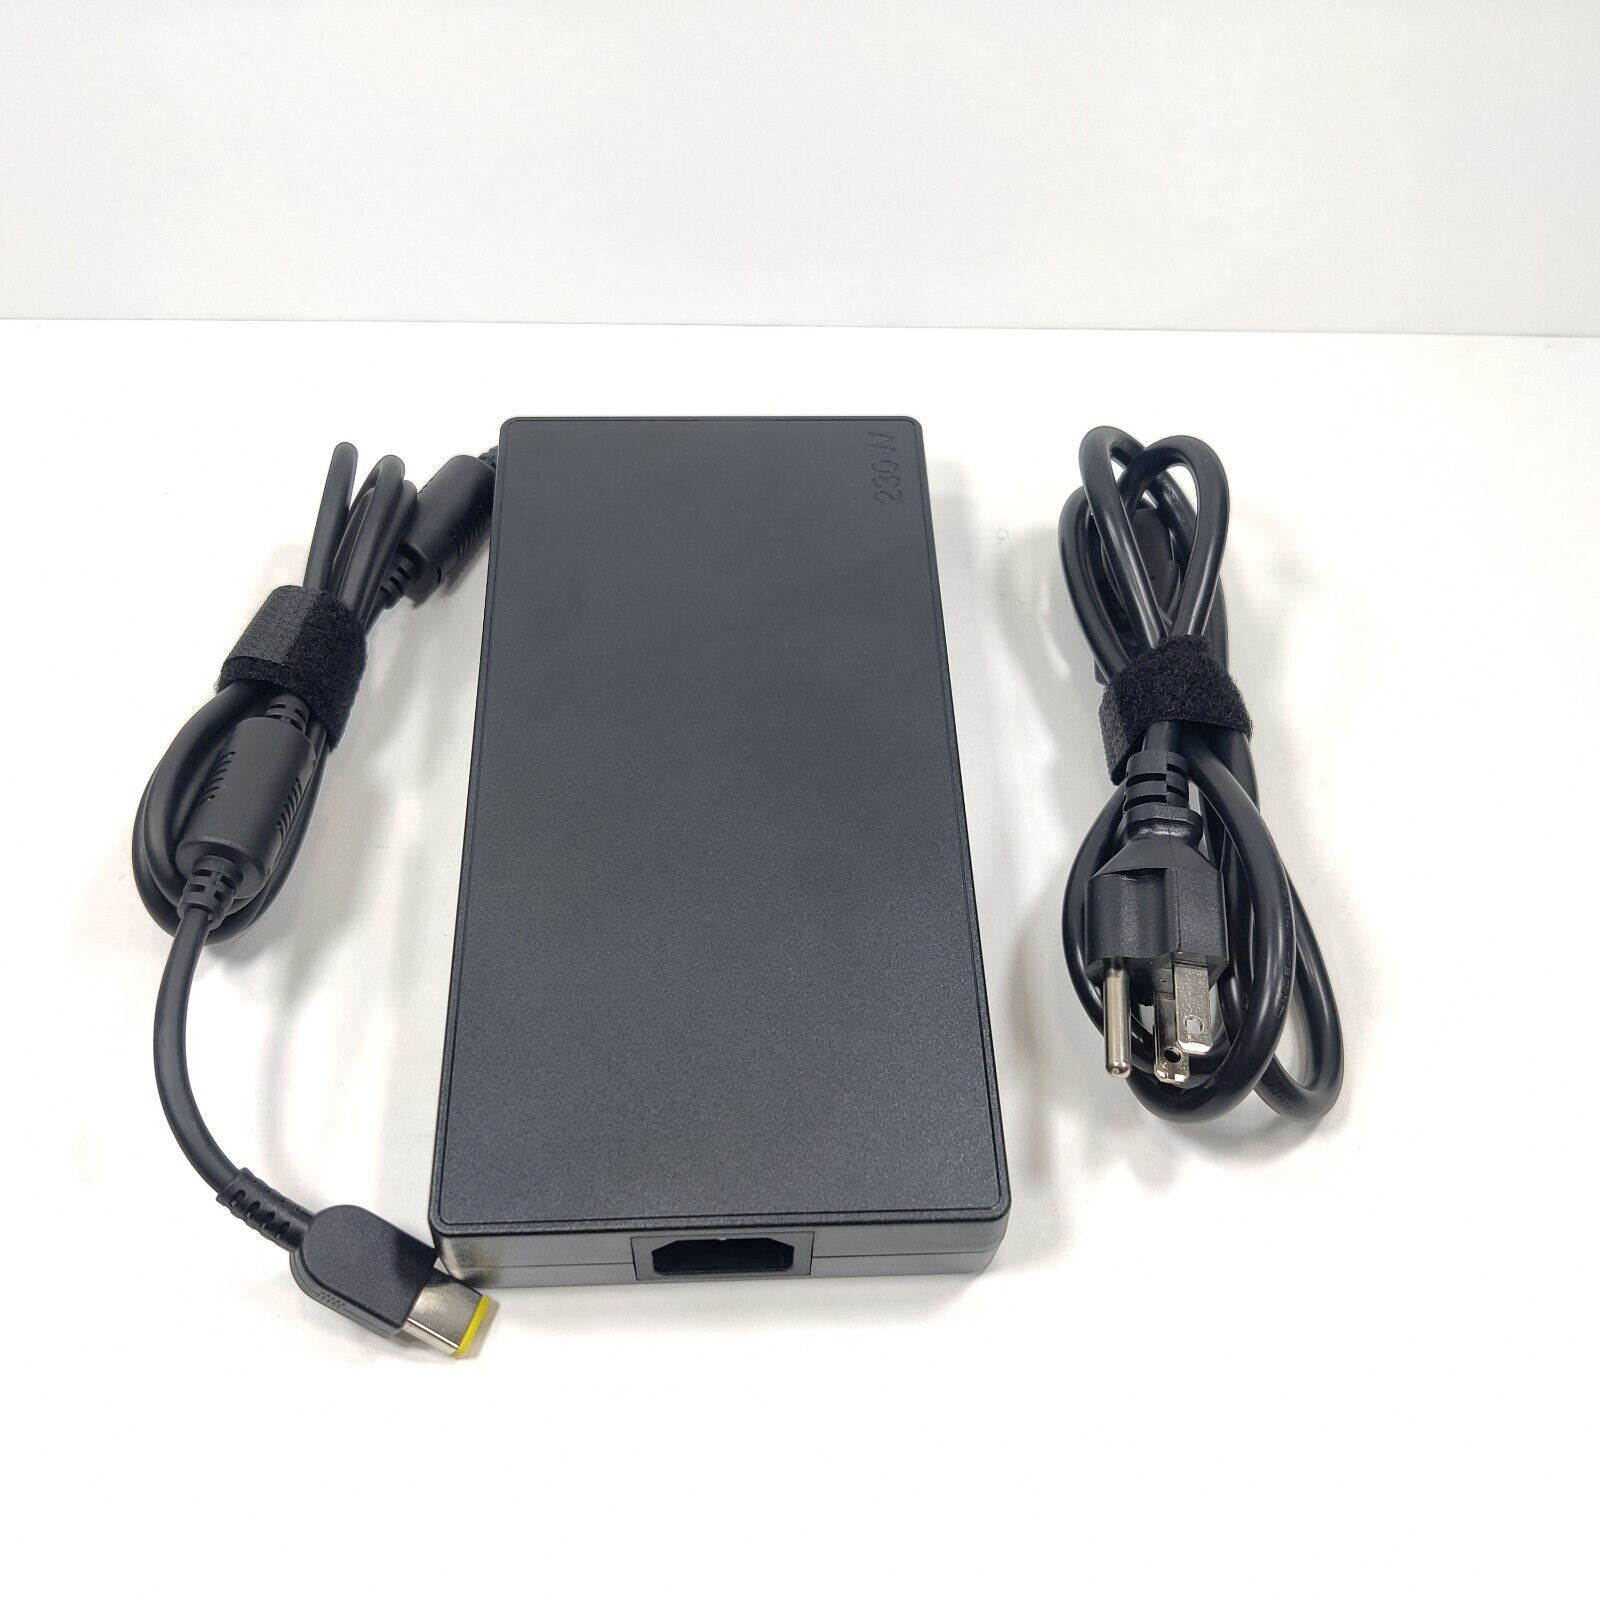 230W 20V 11.5A Laptop Power Supply Charger For Lenovo Thinkpad